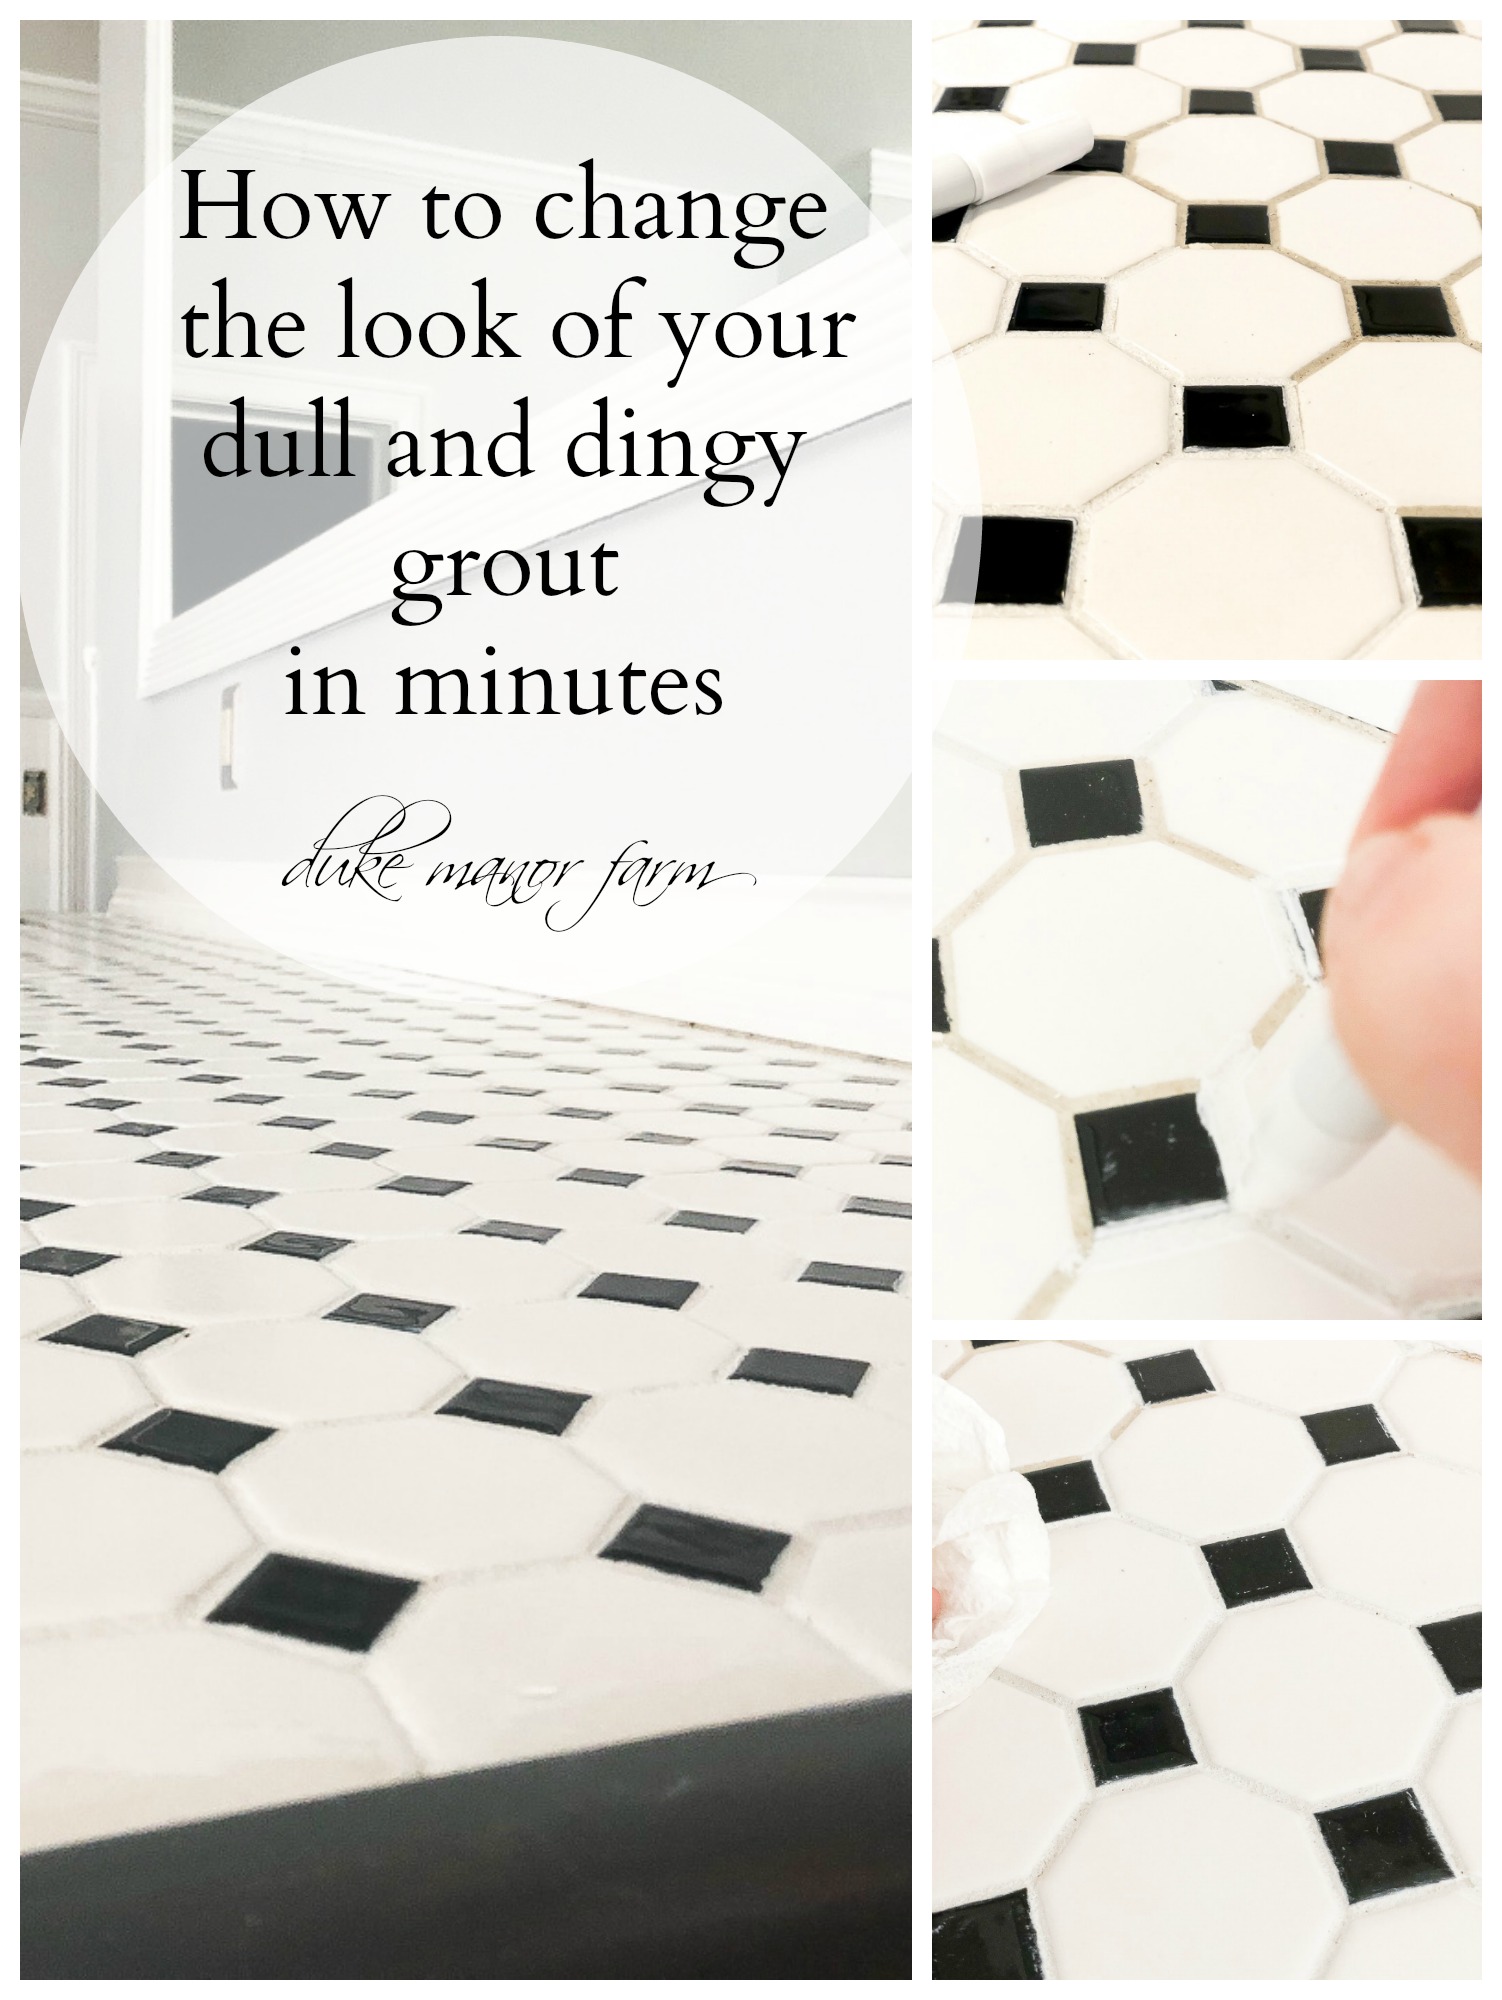 How to change the look of your grout in minutes